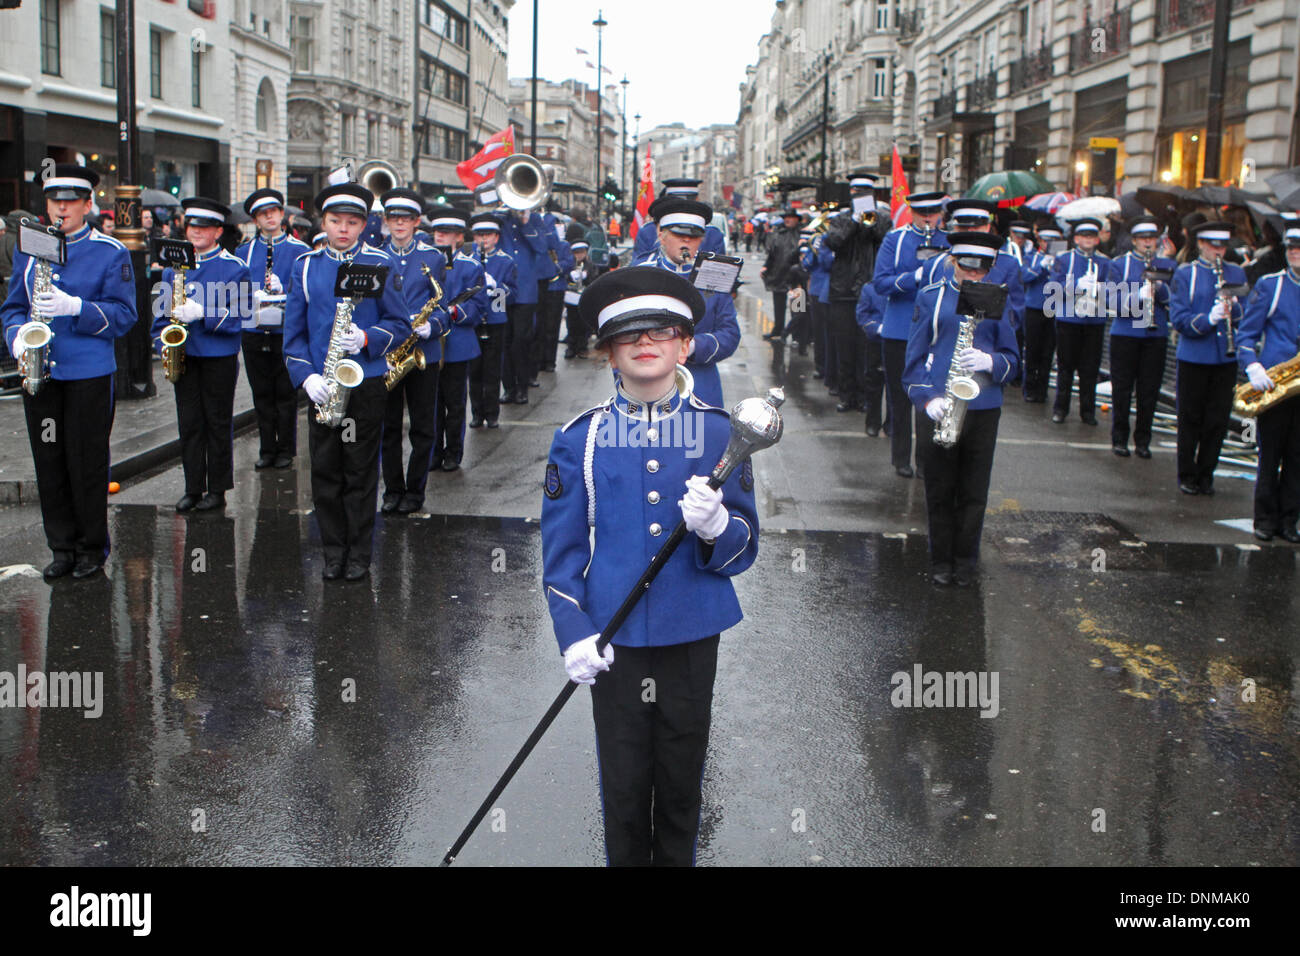 London,UK,1st January 2014,Essex marching Corps from Benfleet took part in the London's New Year's Day Parade 2014 Credit: Keith Larby/Alamy Live News Stock Photo